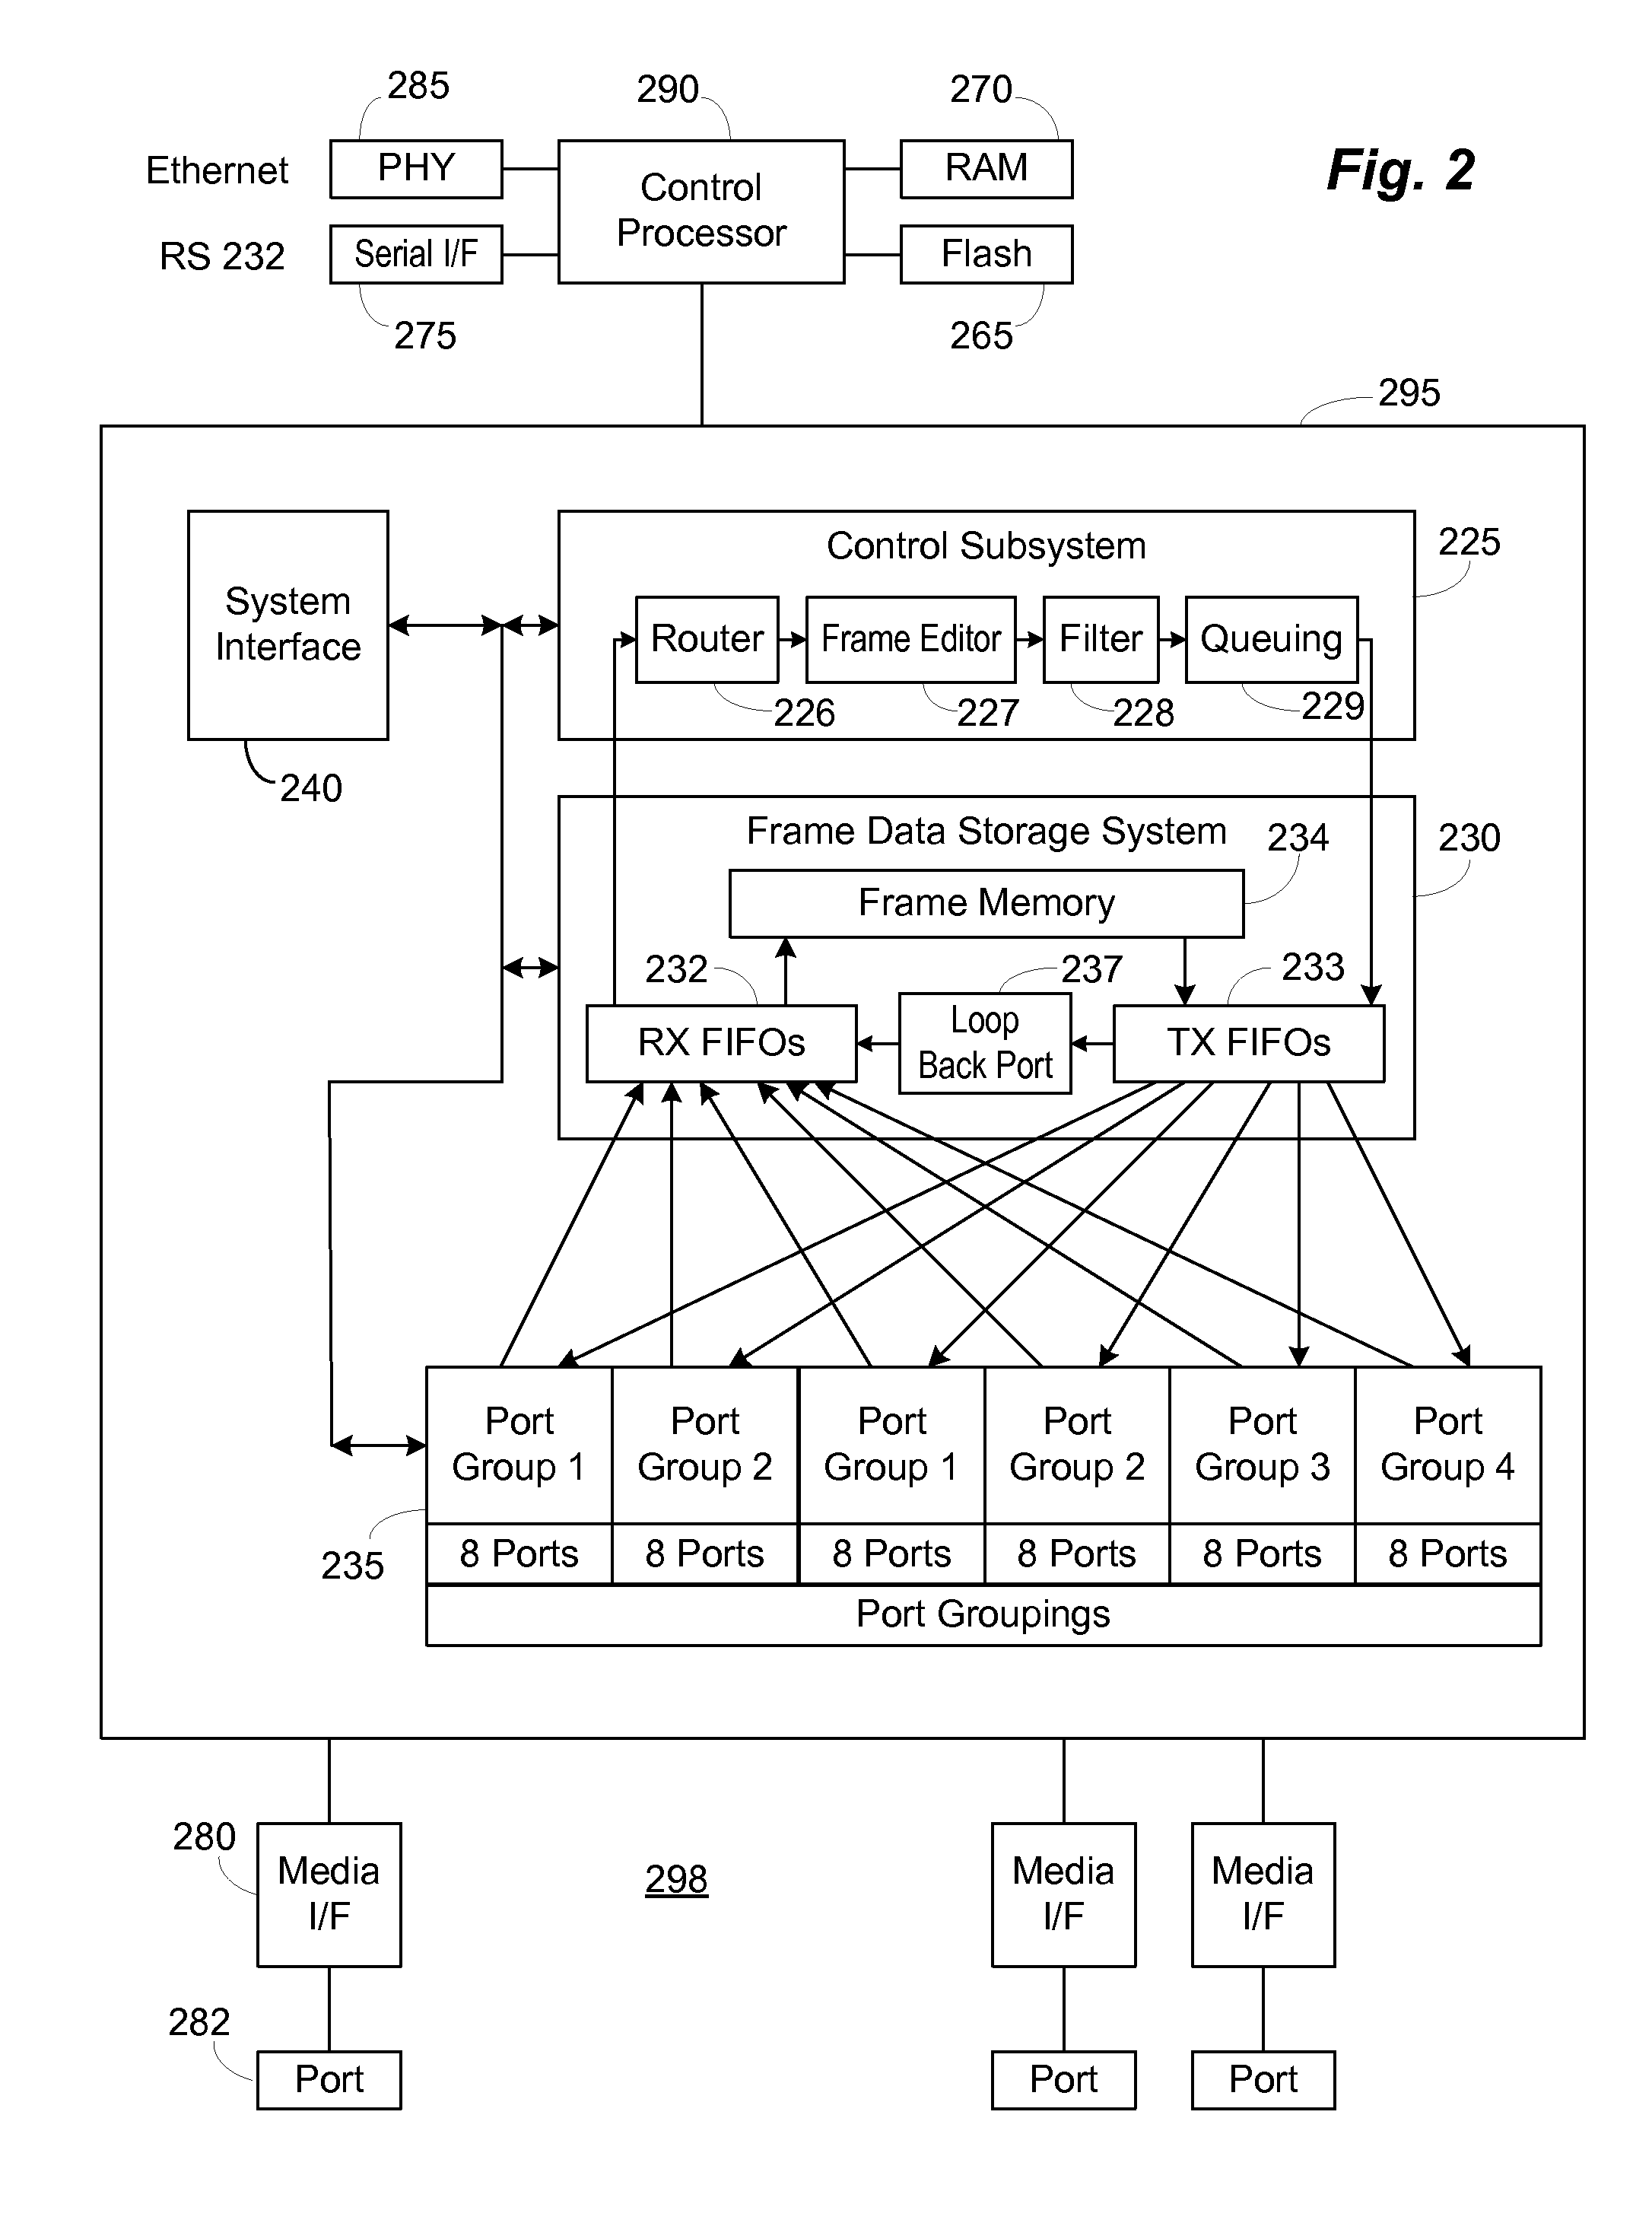 Method and Apparatus for Mirroring Frames to a Remote Diagnostic System